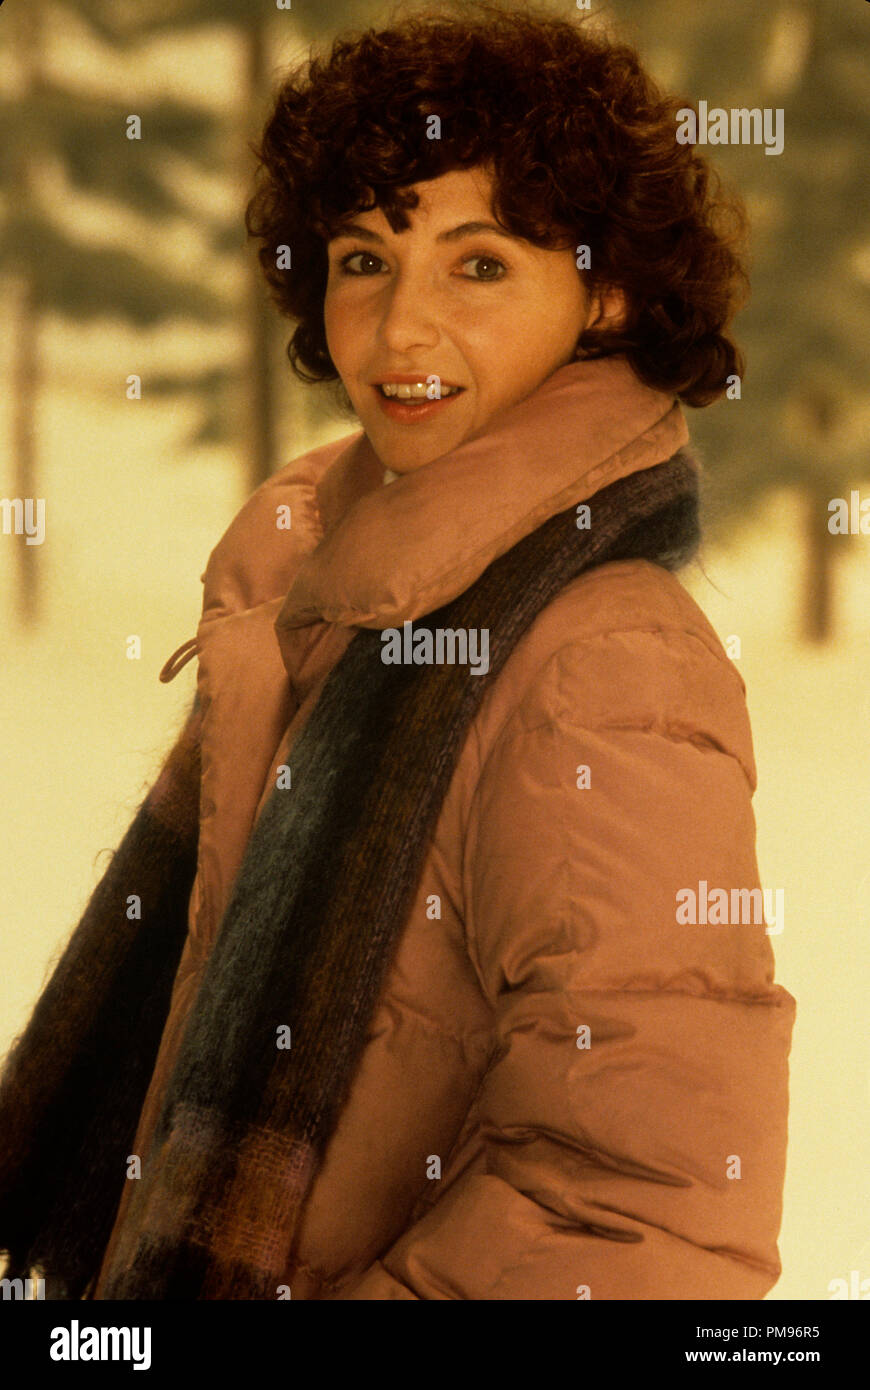 Studio Publicity Still from 'One Magic Christmas' Mary Steenburgen © 1985 Walt Disney Pictures Photo Credit: Guy Webster  All Rights Reserved   File Reference # 31703185THA  For Editorial Use Only Stock Photo